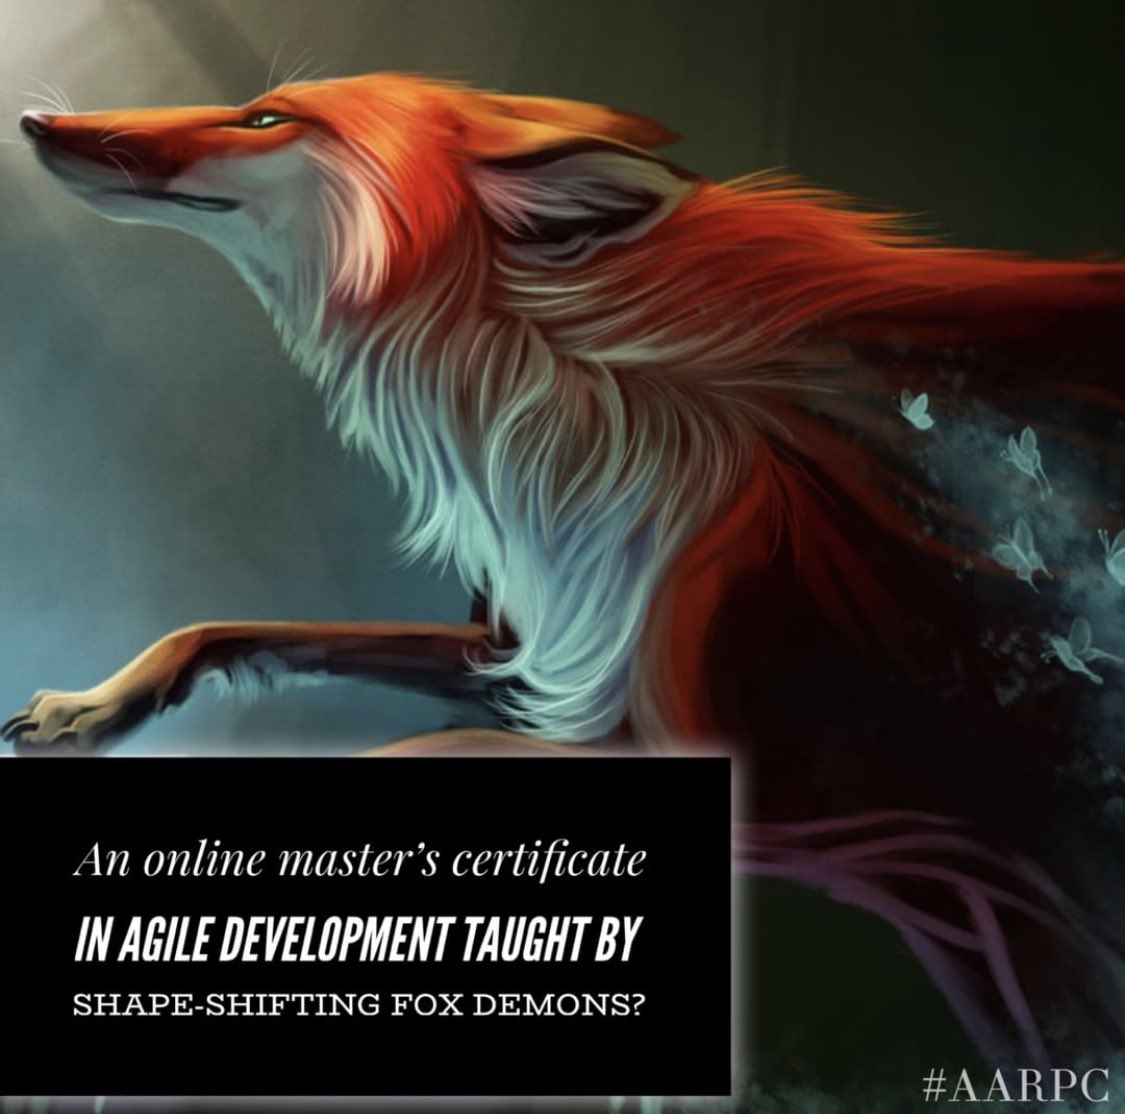 Do you know where to sign up? We’d really like to take this course. #foxspirits #foxdemons #ongoingeducation #edtech #mba #onlinelearning #agiledevelopment #agile #lean